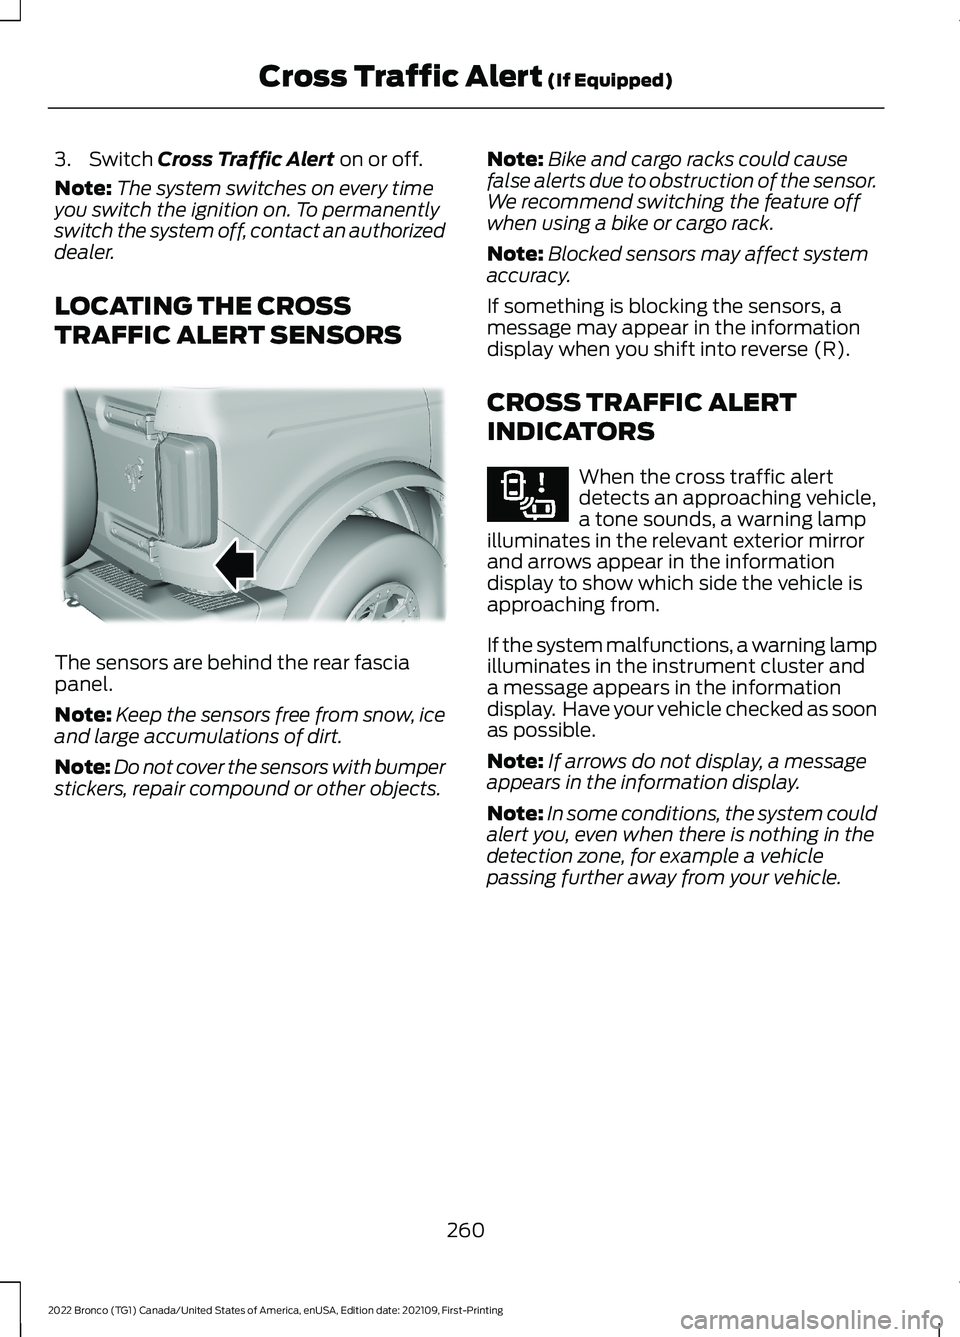 FORD BRONCO 2022 Owners Guide 3.Switch Cross Traffic Alert on or off.
Note:The system switches on every timeyou switch the ignition on. To permanentlyswitch the system off, contact an authorizeddealer.
LOCATING THE CROSS
TRAFFIC A